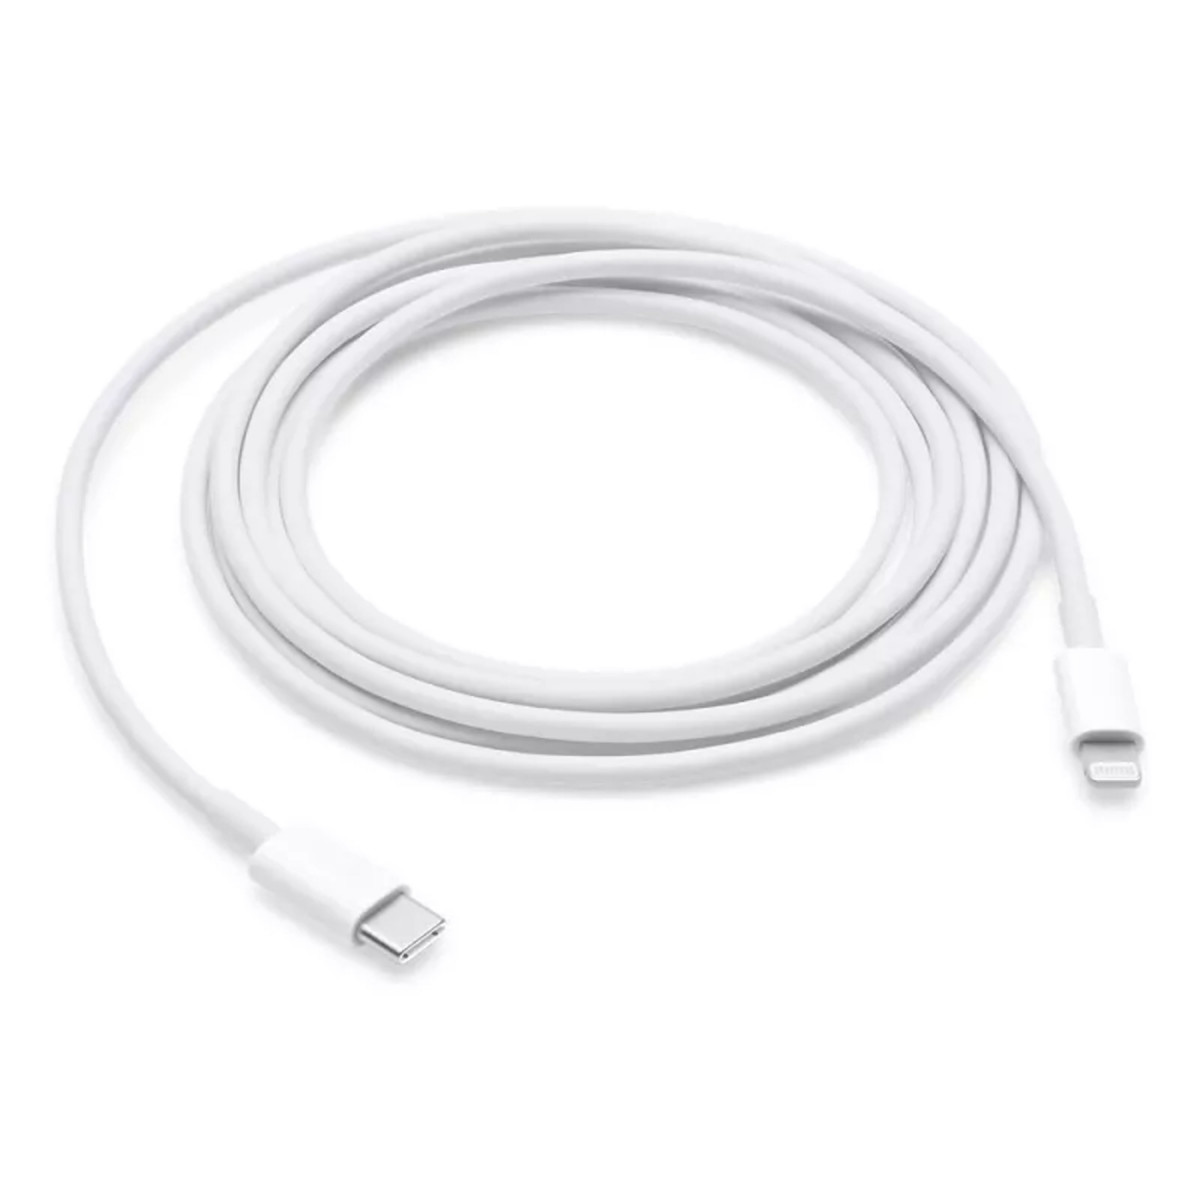 USB-C to Lightning Cable (1m) with packing ORIG